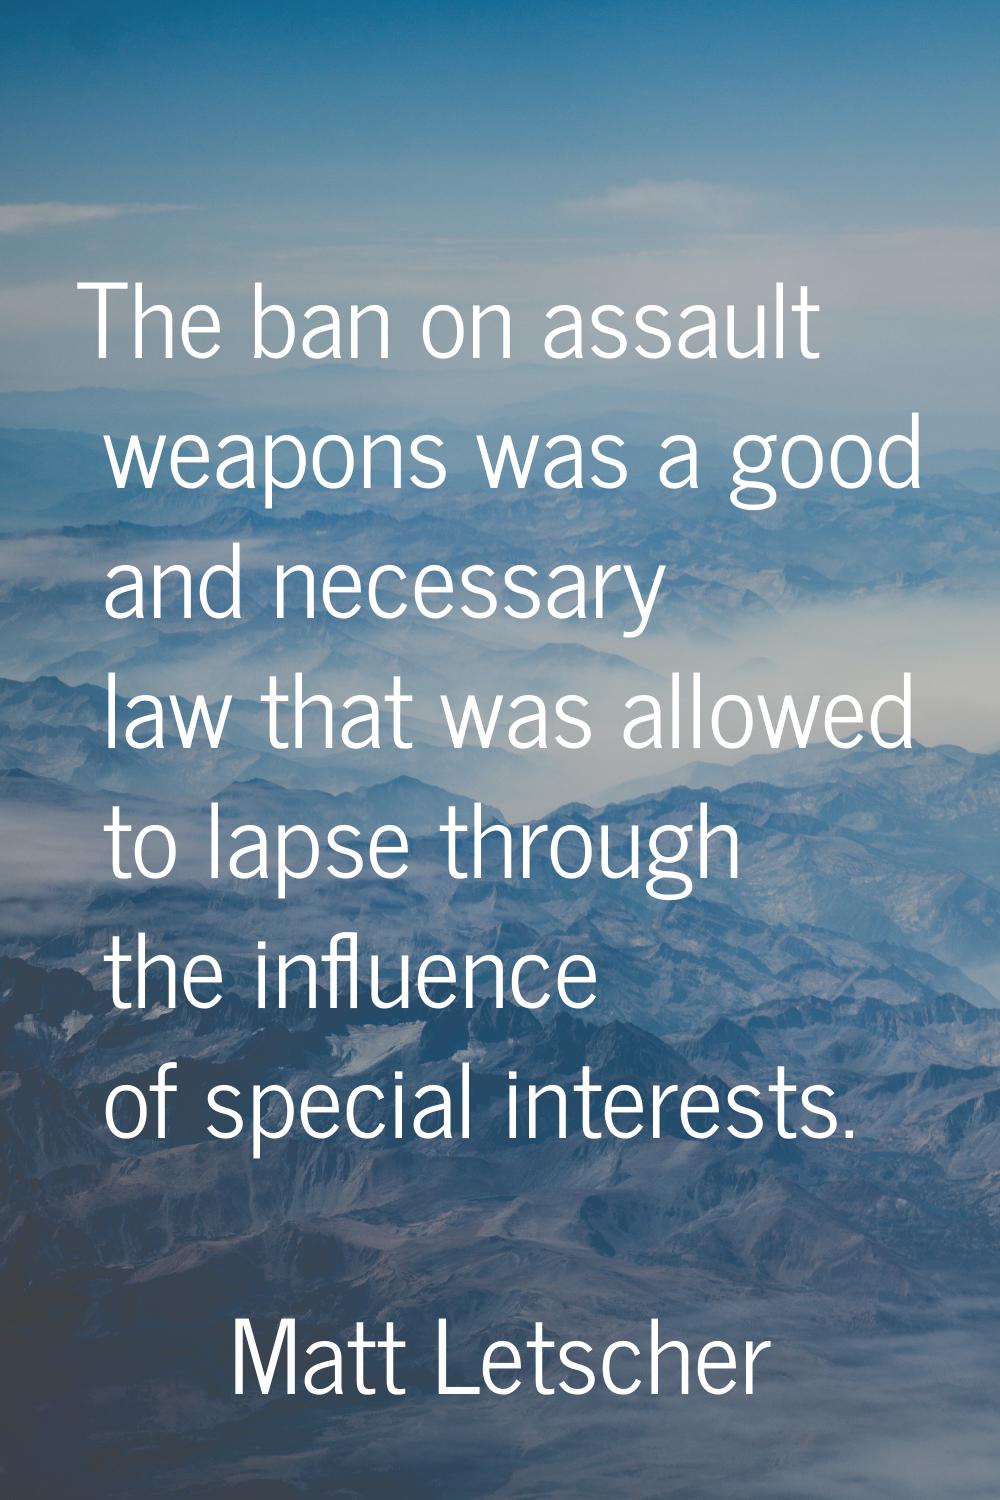 The ban on assault weapons was a good and necessary law that was allowed to lapse through the influ